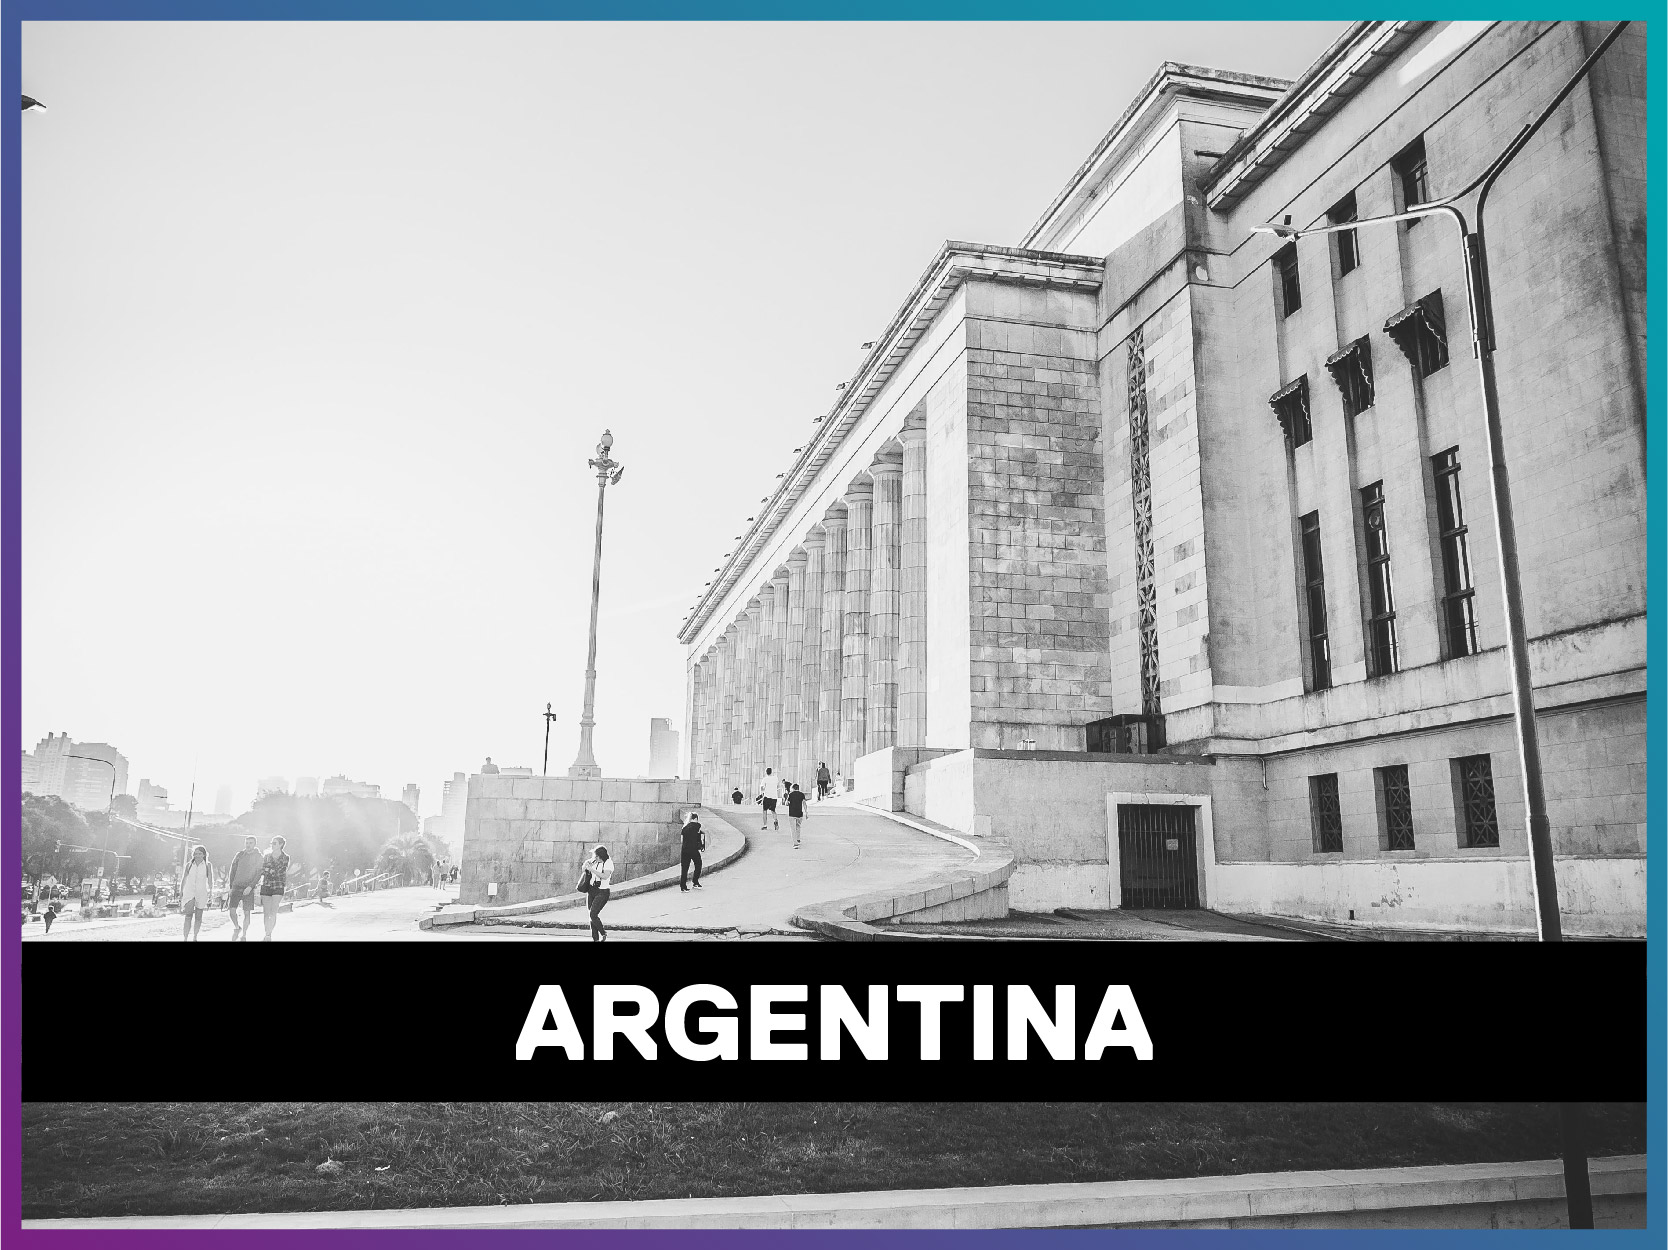 Argentina is written on a banner on top of a picture of the country